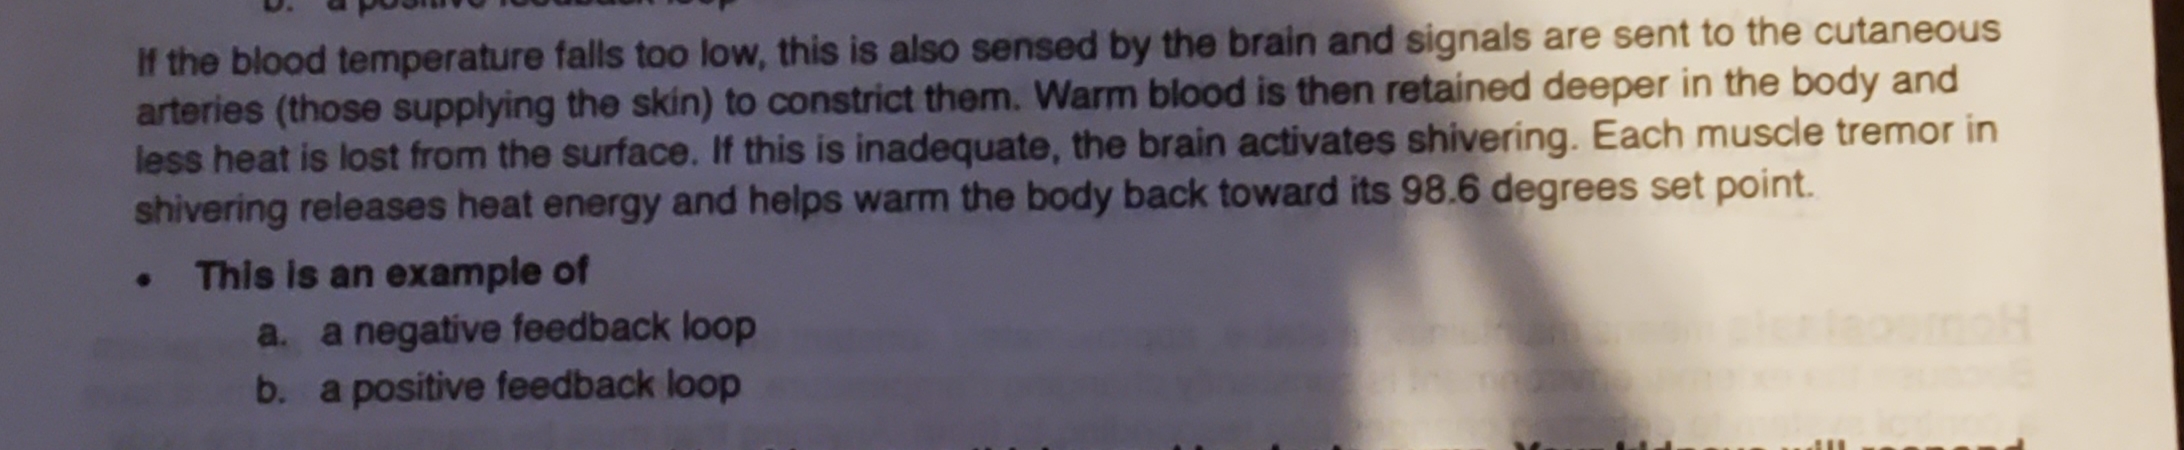 If the blood temperature falls too low, this is also sensed by the brain and signals are sent to the cutaneous
arteries (those supplying the skin) to constrict them. Warm blood is then retained deeper in the body and
less heat is lost from the surface. If this is inadequate, the brain activates shivering. Each muscle tremor in
shivering releases heat energy and helps warm the body back toward its 98.6 degrees set point.
• This is an example of
a. a negative feedback loop
b. a positive feedback loop
